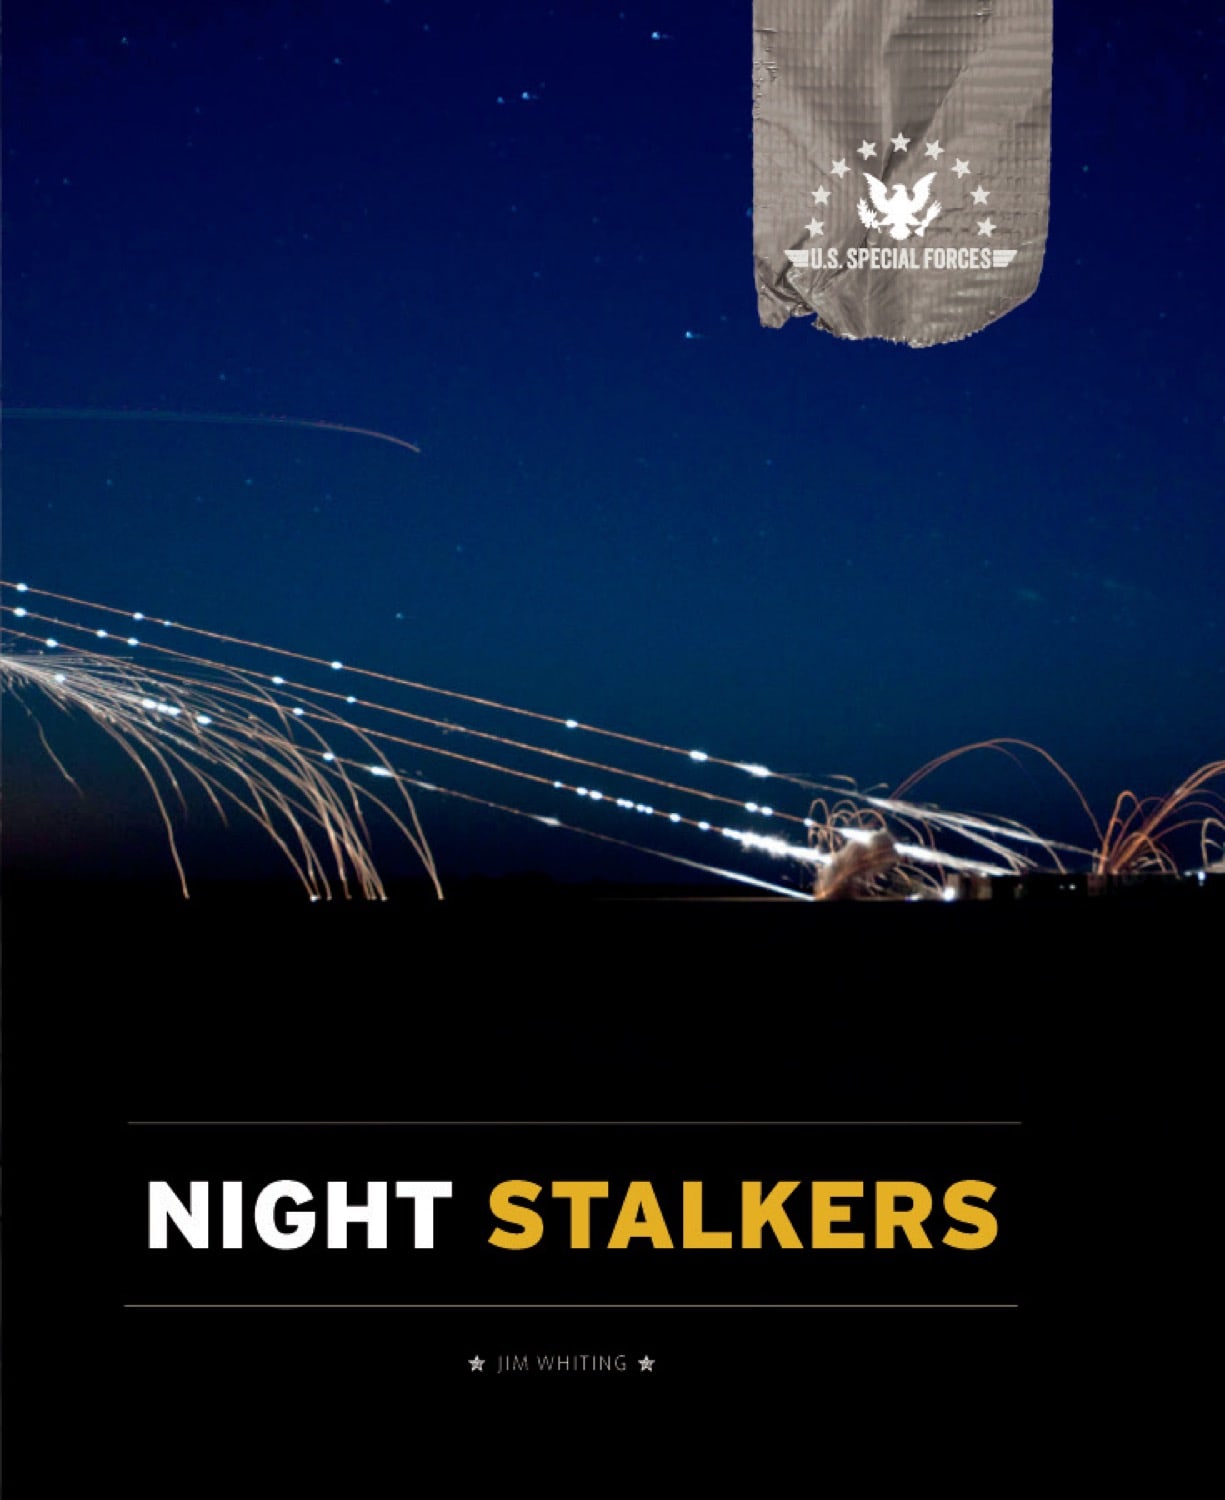 U.S. Special Forces: Night Stalkers